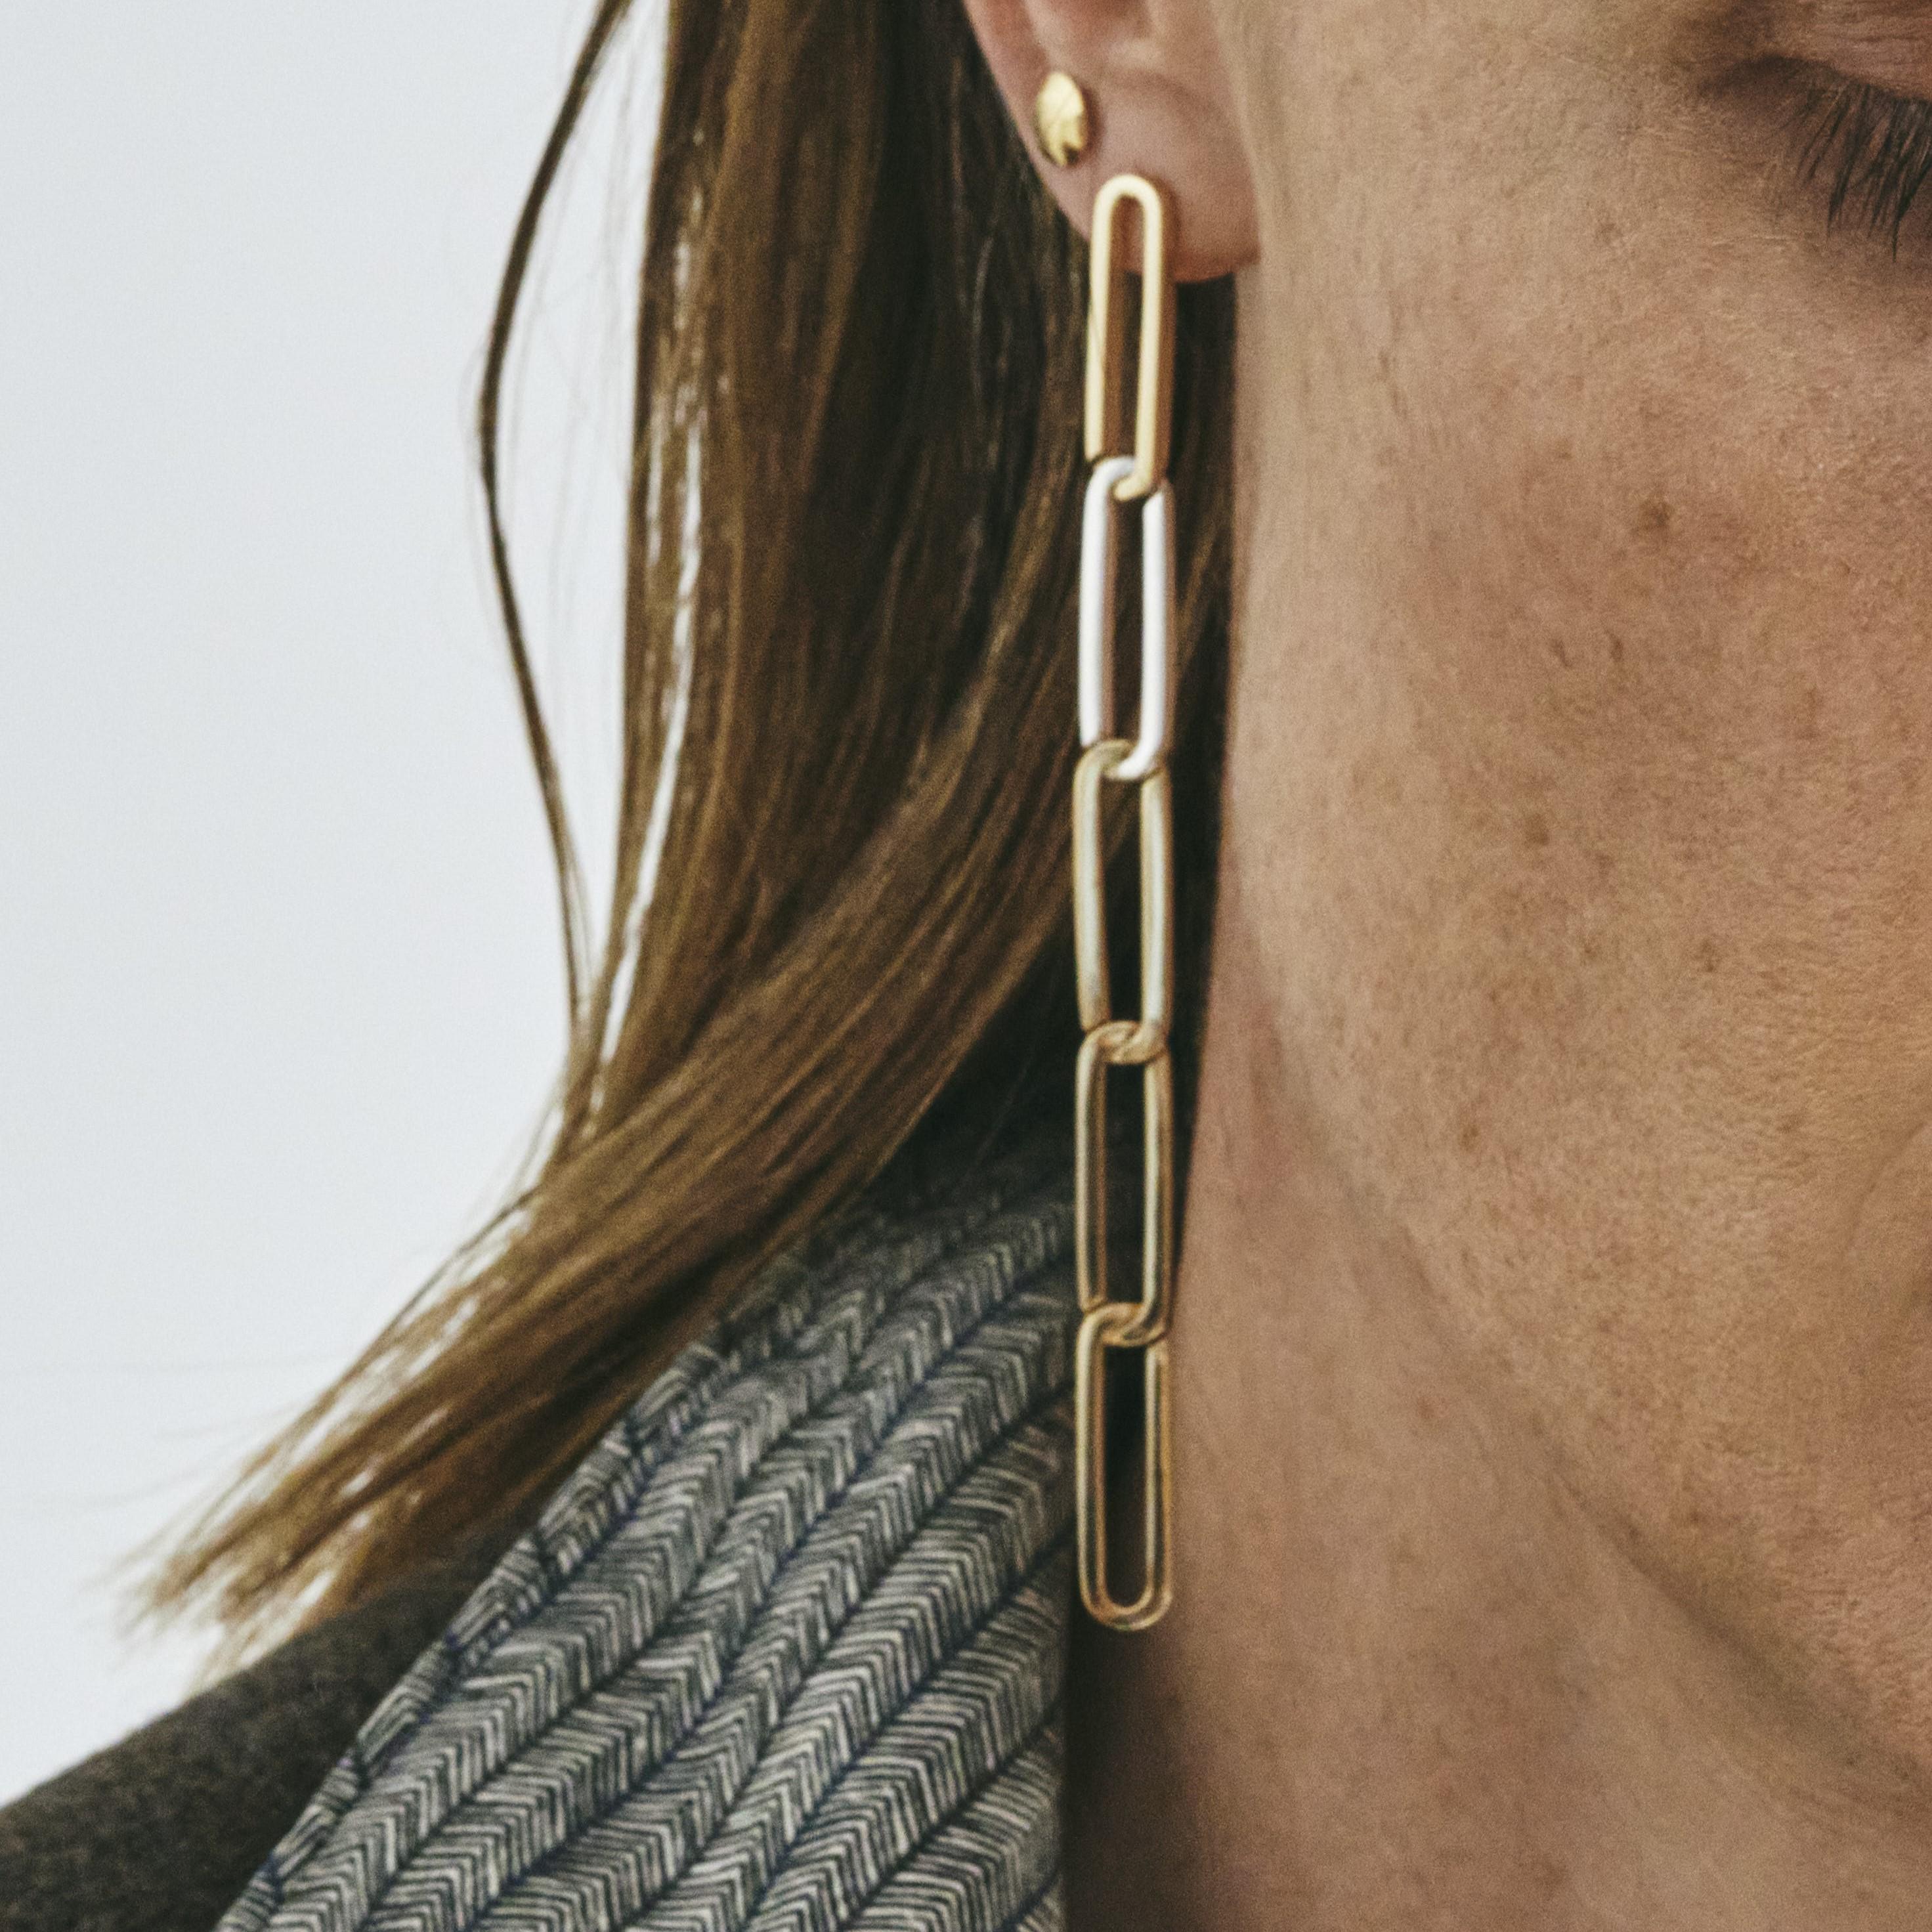 This statement earring with five sleek links is handmade in solid recycled 18k gold interposed with a single link in silver. The links are designed according to the ancient art of Japanese wood joinery – they fit neatly together when still, but come